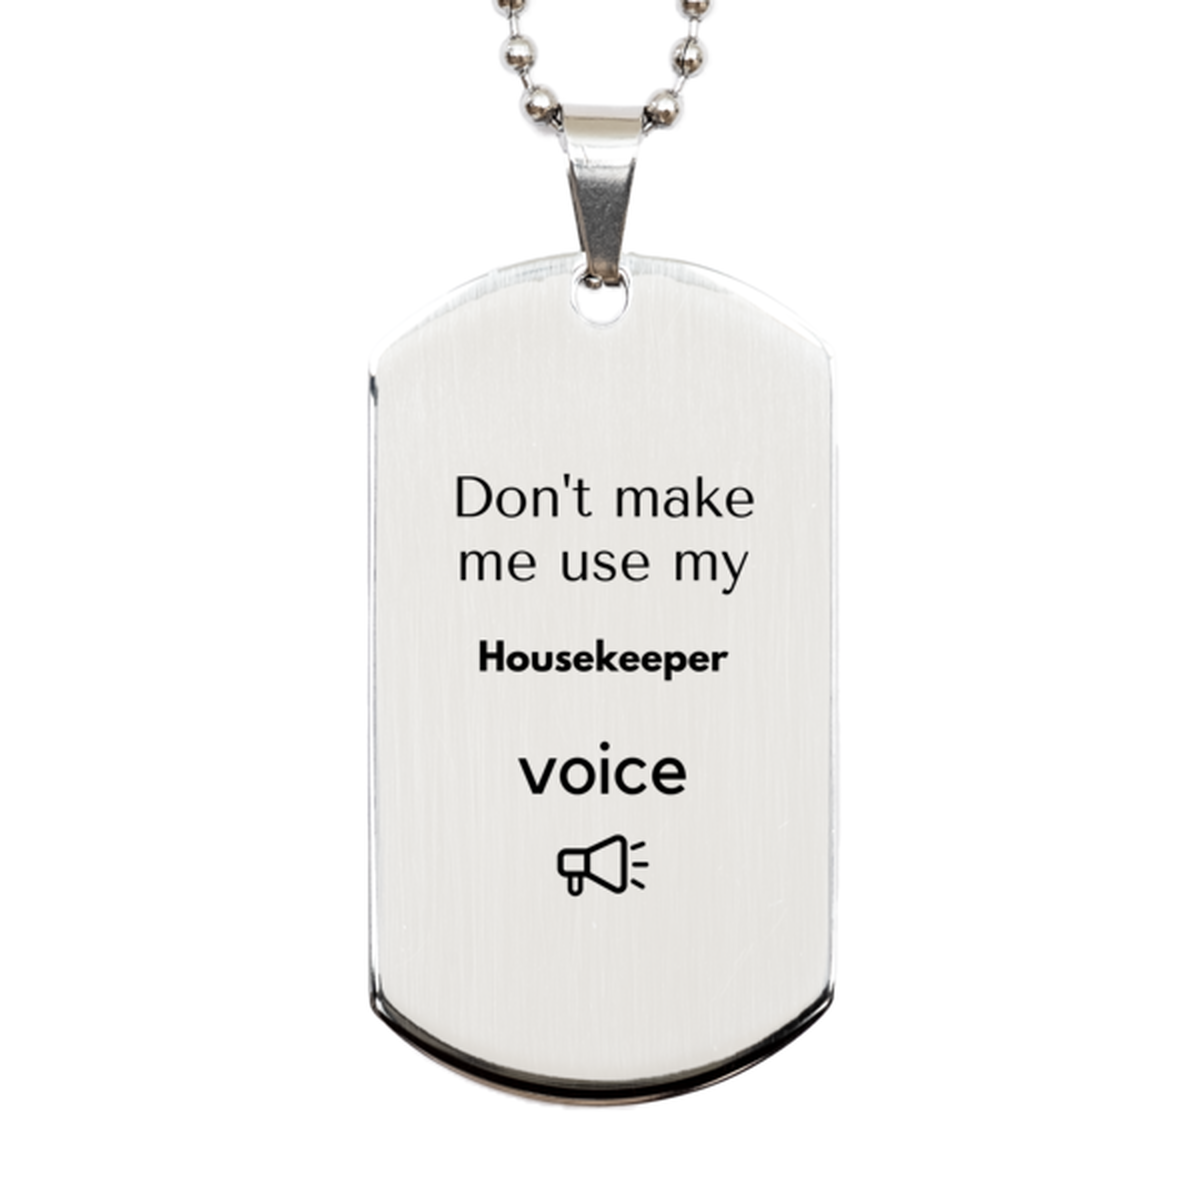 Don't make me use my Housekeeper voice, Sarcasm Housekeeper Gifts, Christmas Housekeeper Silver Dog Tag Birthday Unique Gifts For Housekeeper Coworkers, Men, Women, Colleague, Friends